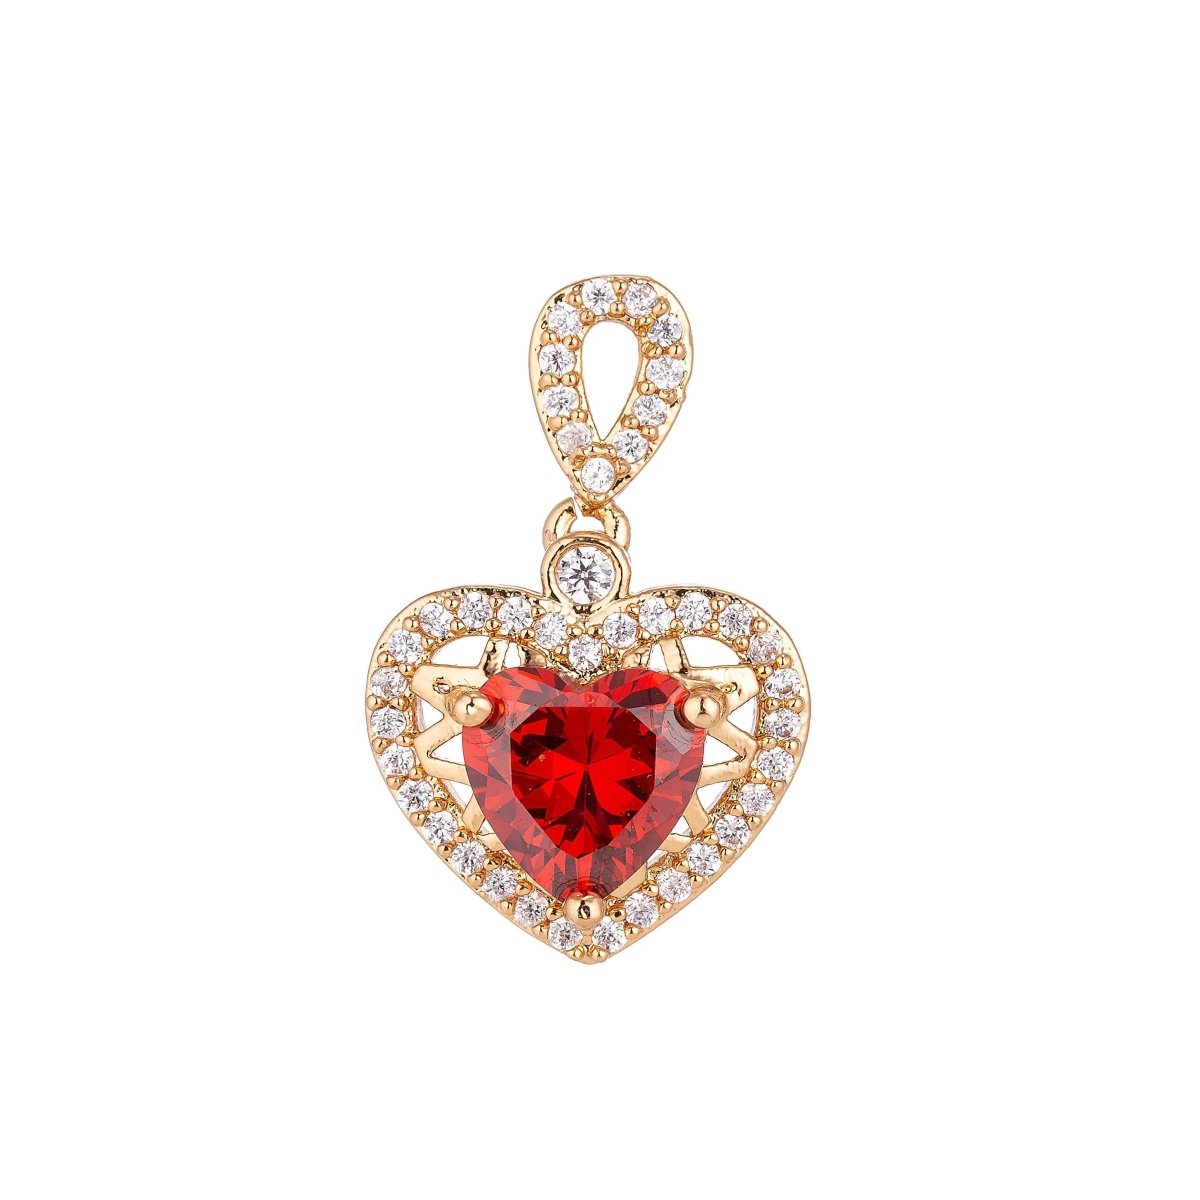 Dainty 18k Gold Filled Red Emerald Heart Love Charm Pendant Classic Love Heart Cut Cubic Zircon Gemstone Necklace for Jewelry Making Valentines Day H-238 - DLUXCA